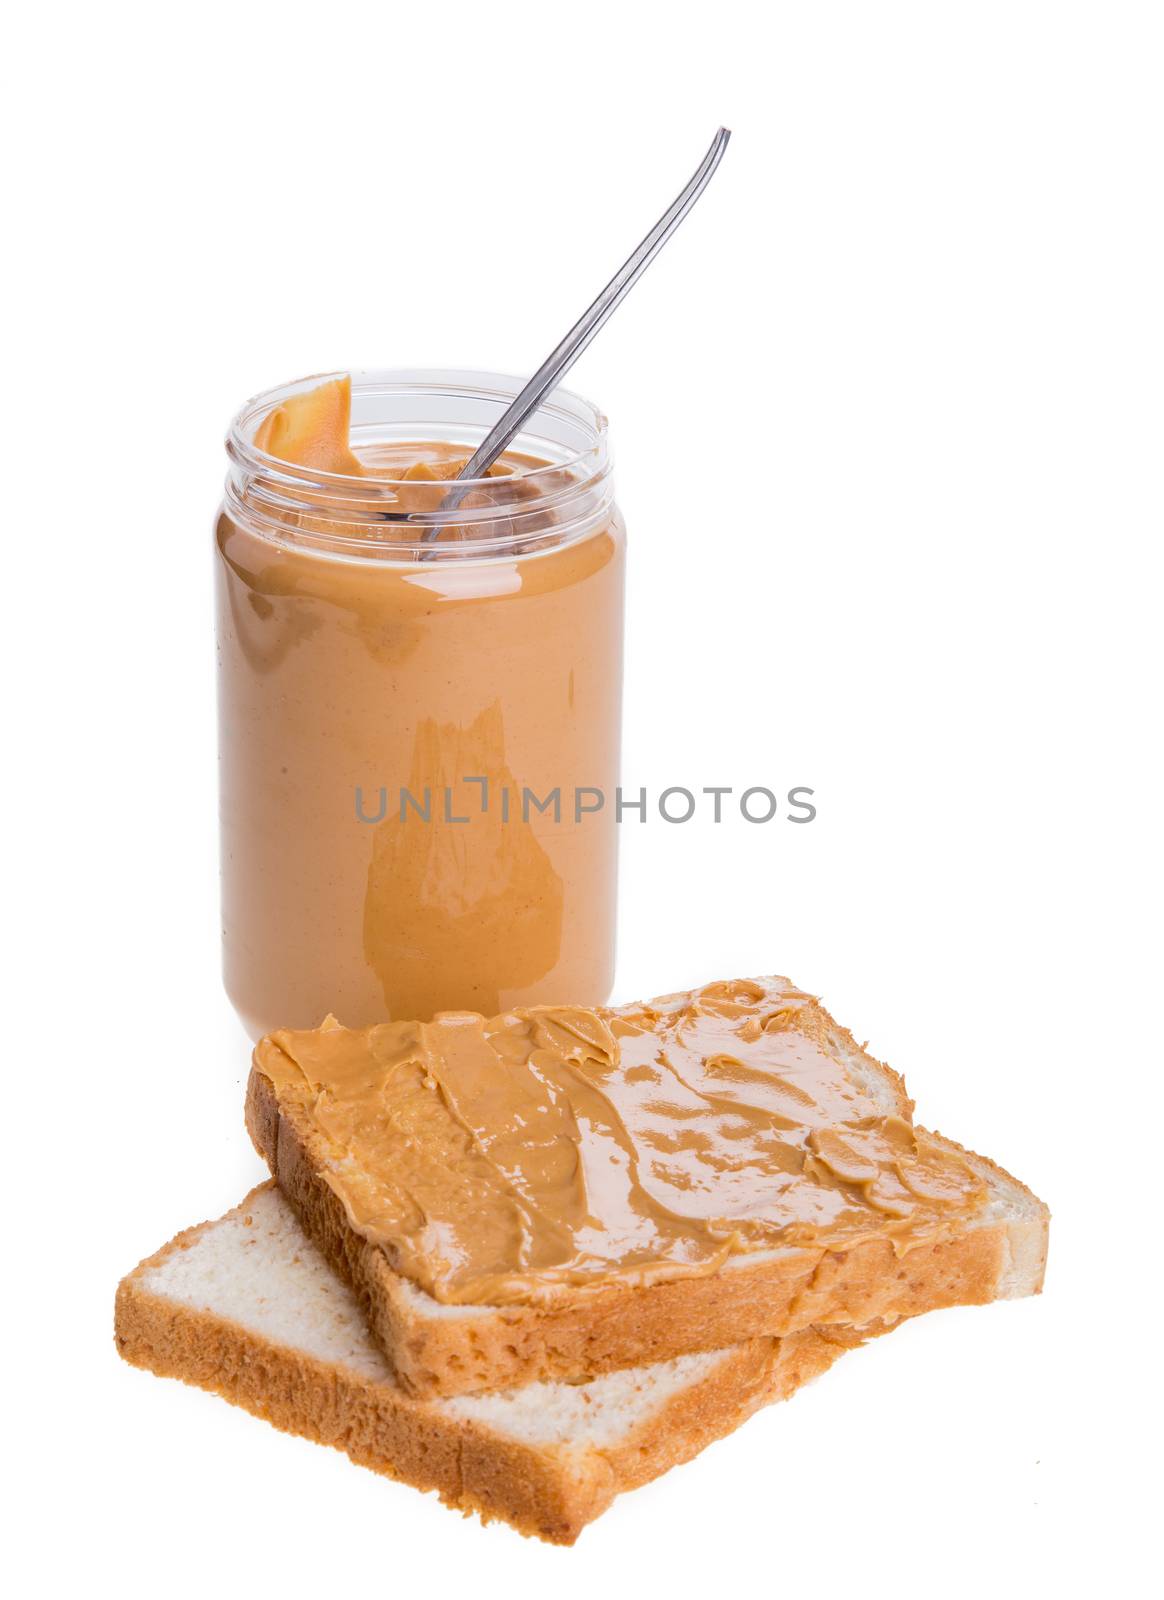 peanut butter sandwich and bread by tehcheesiong